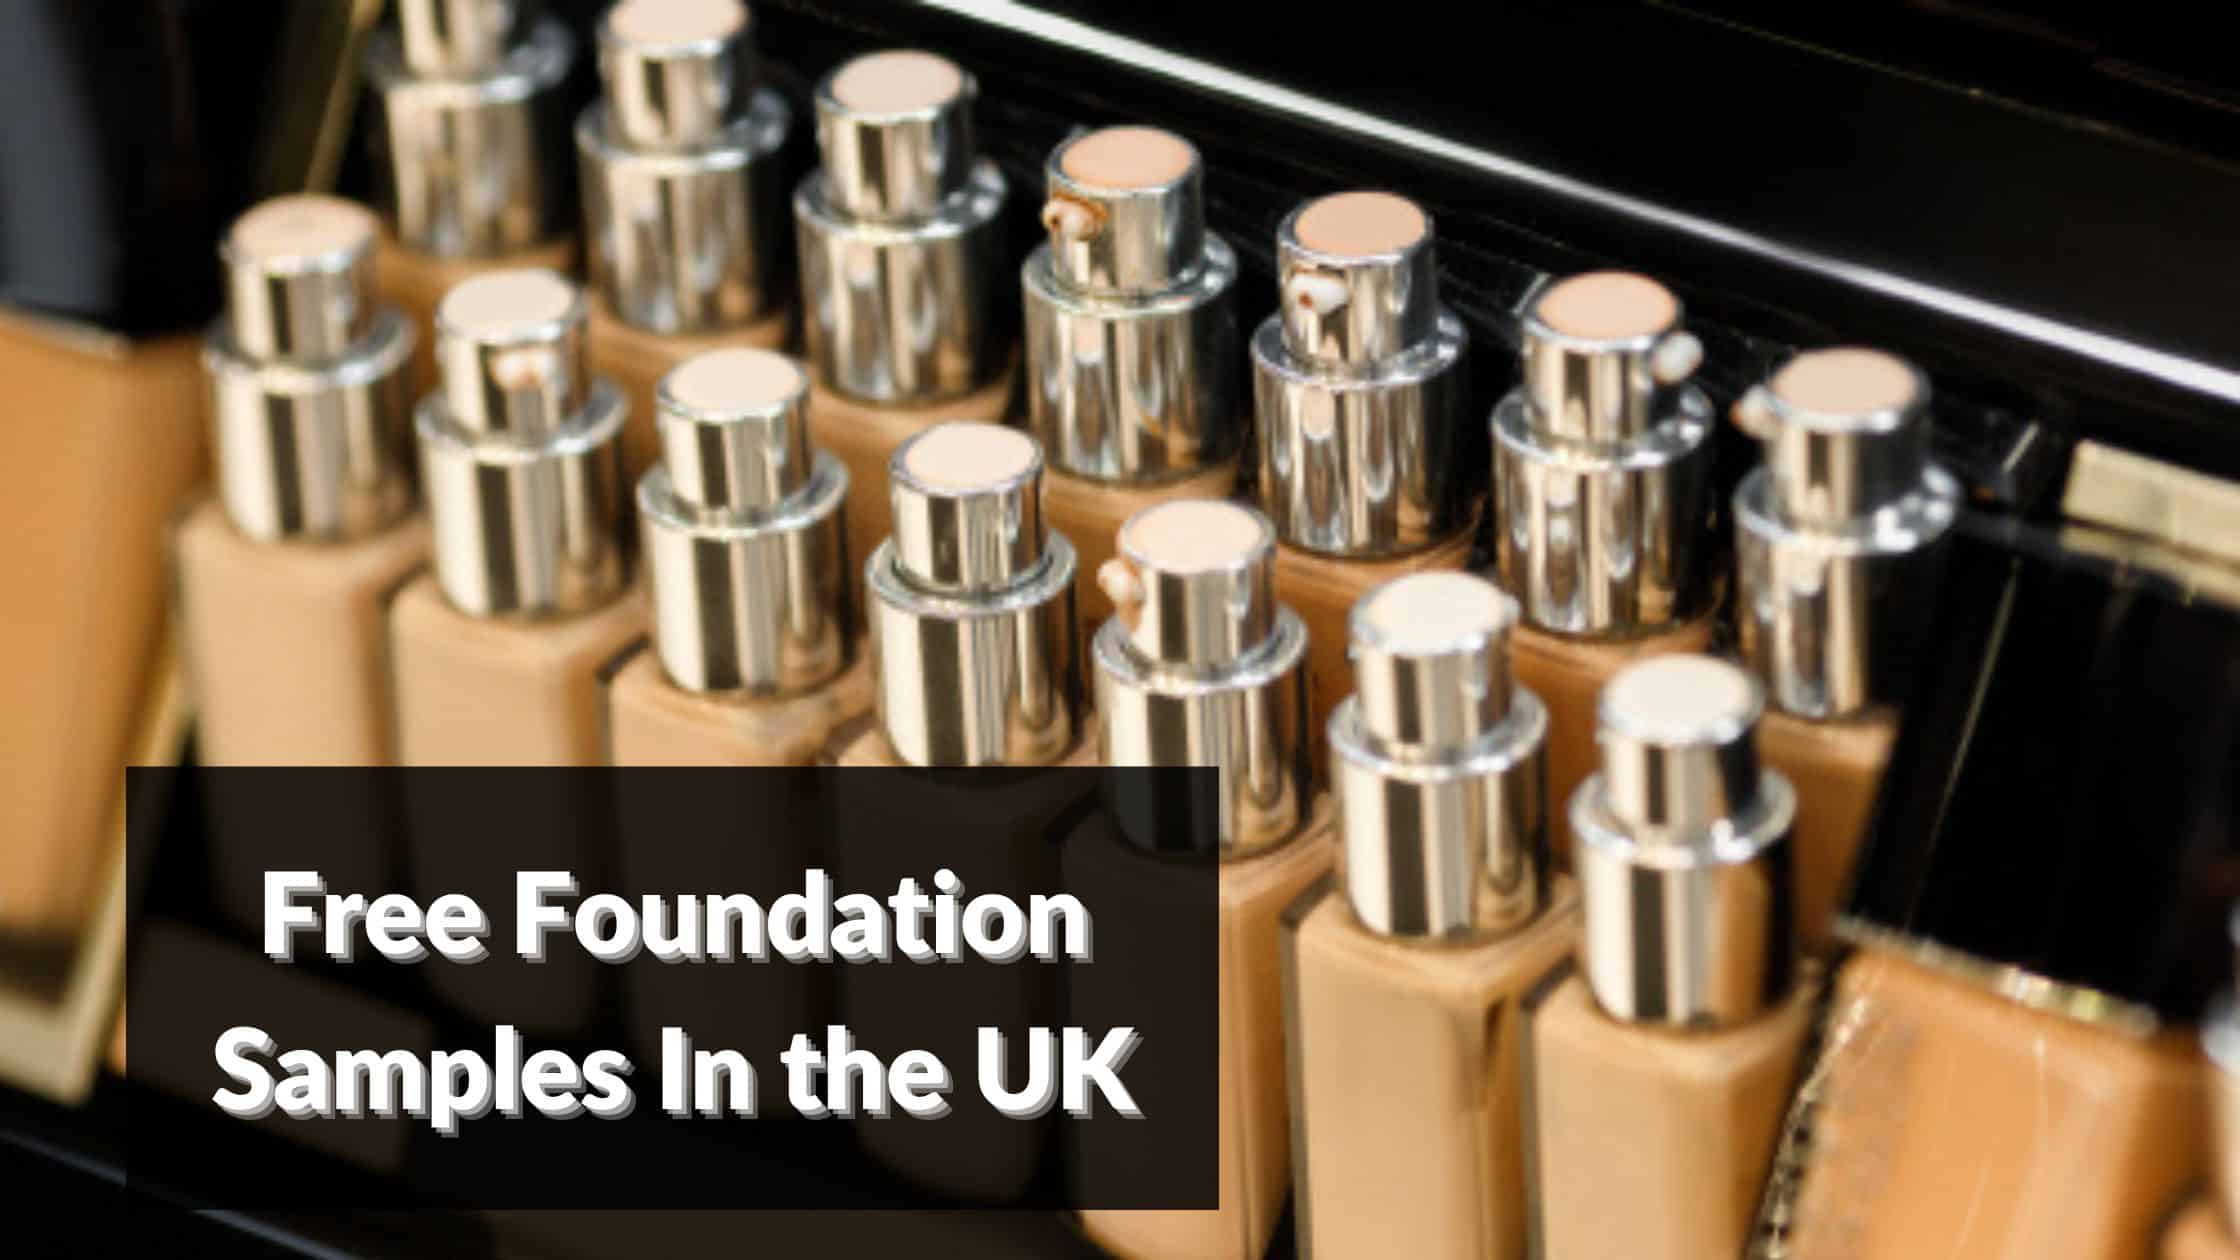 Free Foundation Samples In the UK